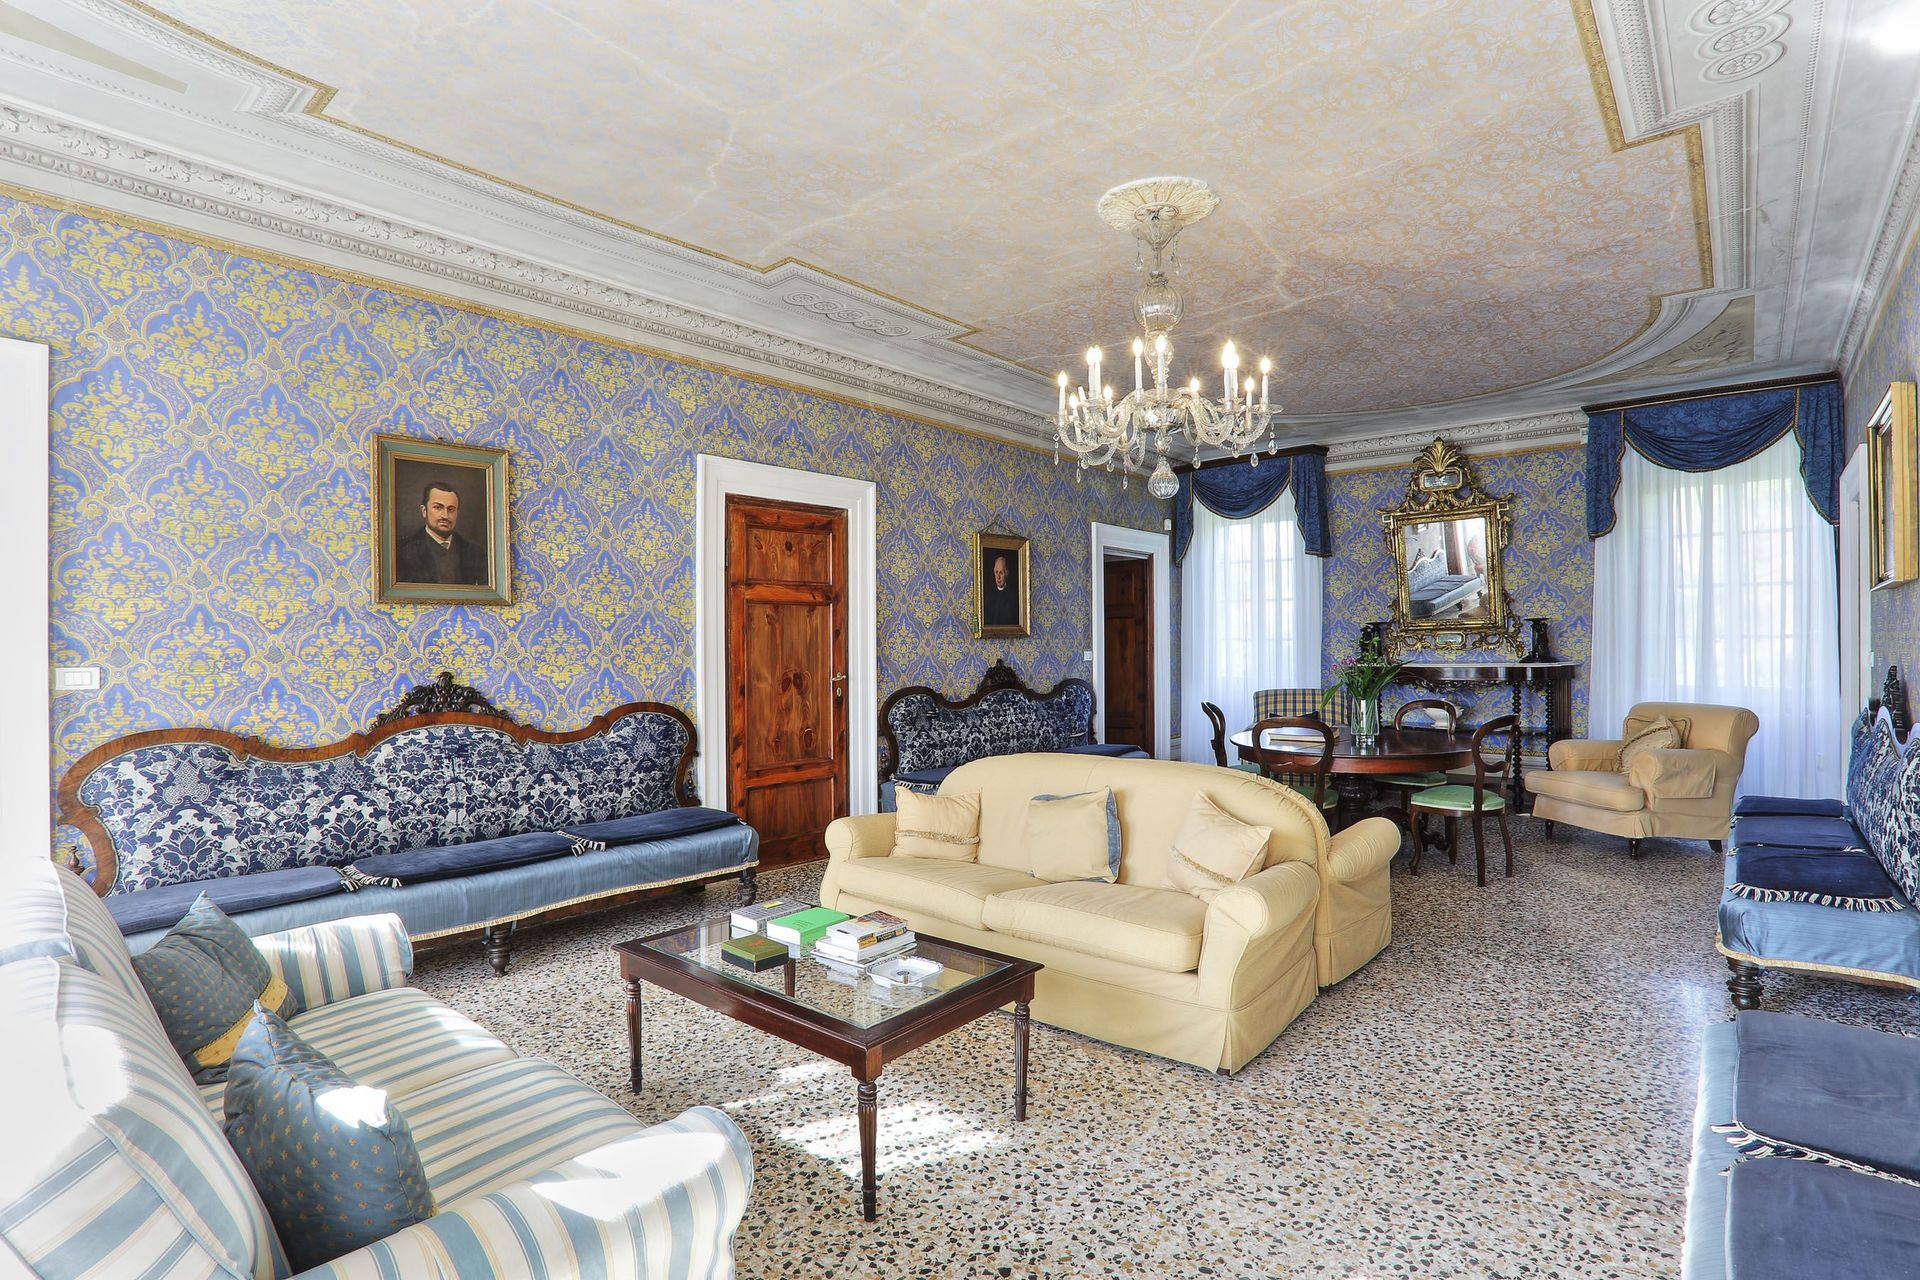 The magnificent interior of one of our villas in Tuscany